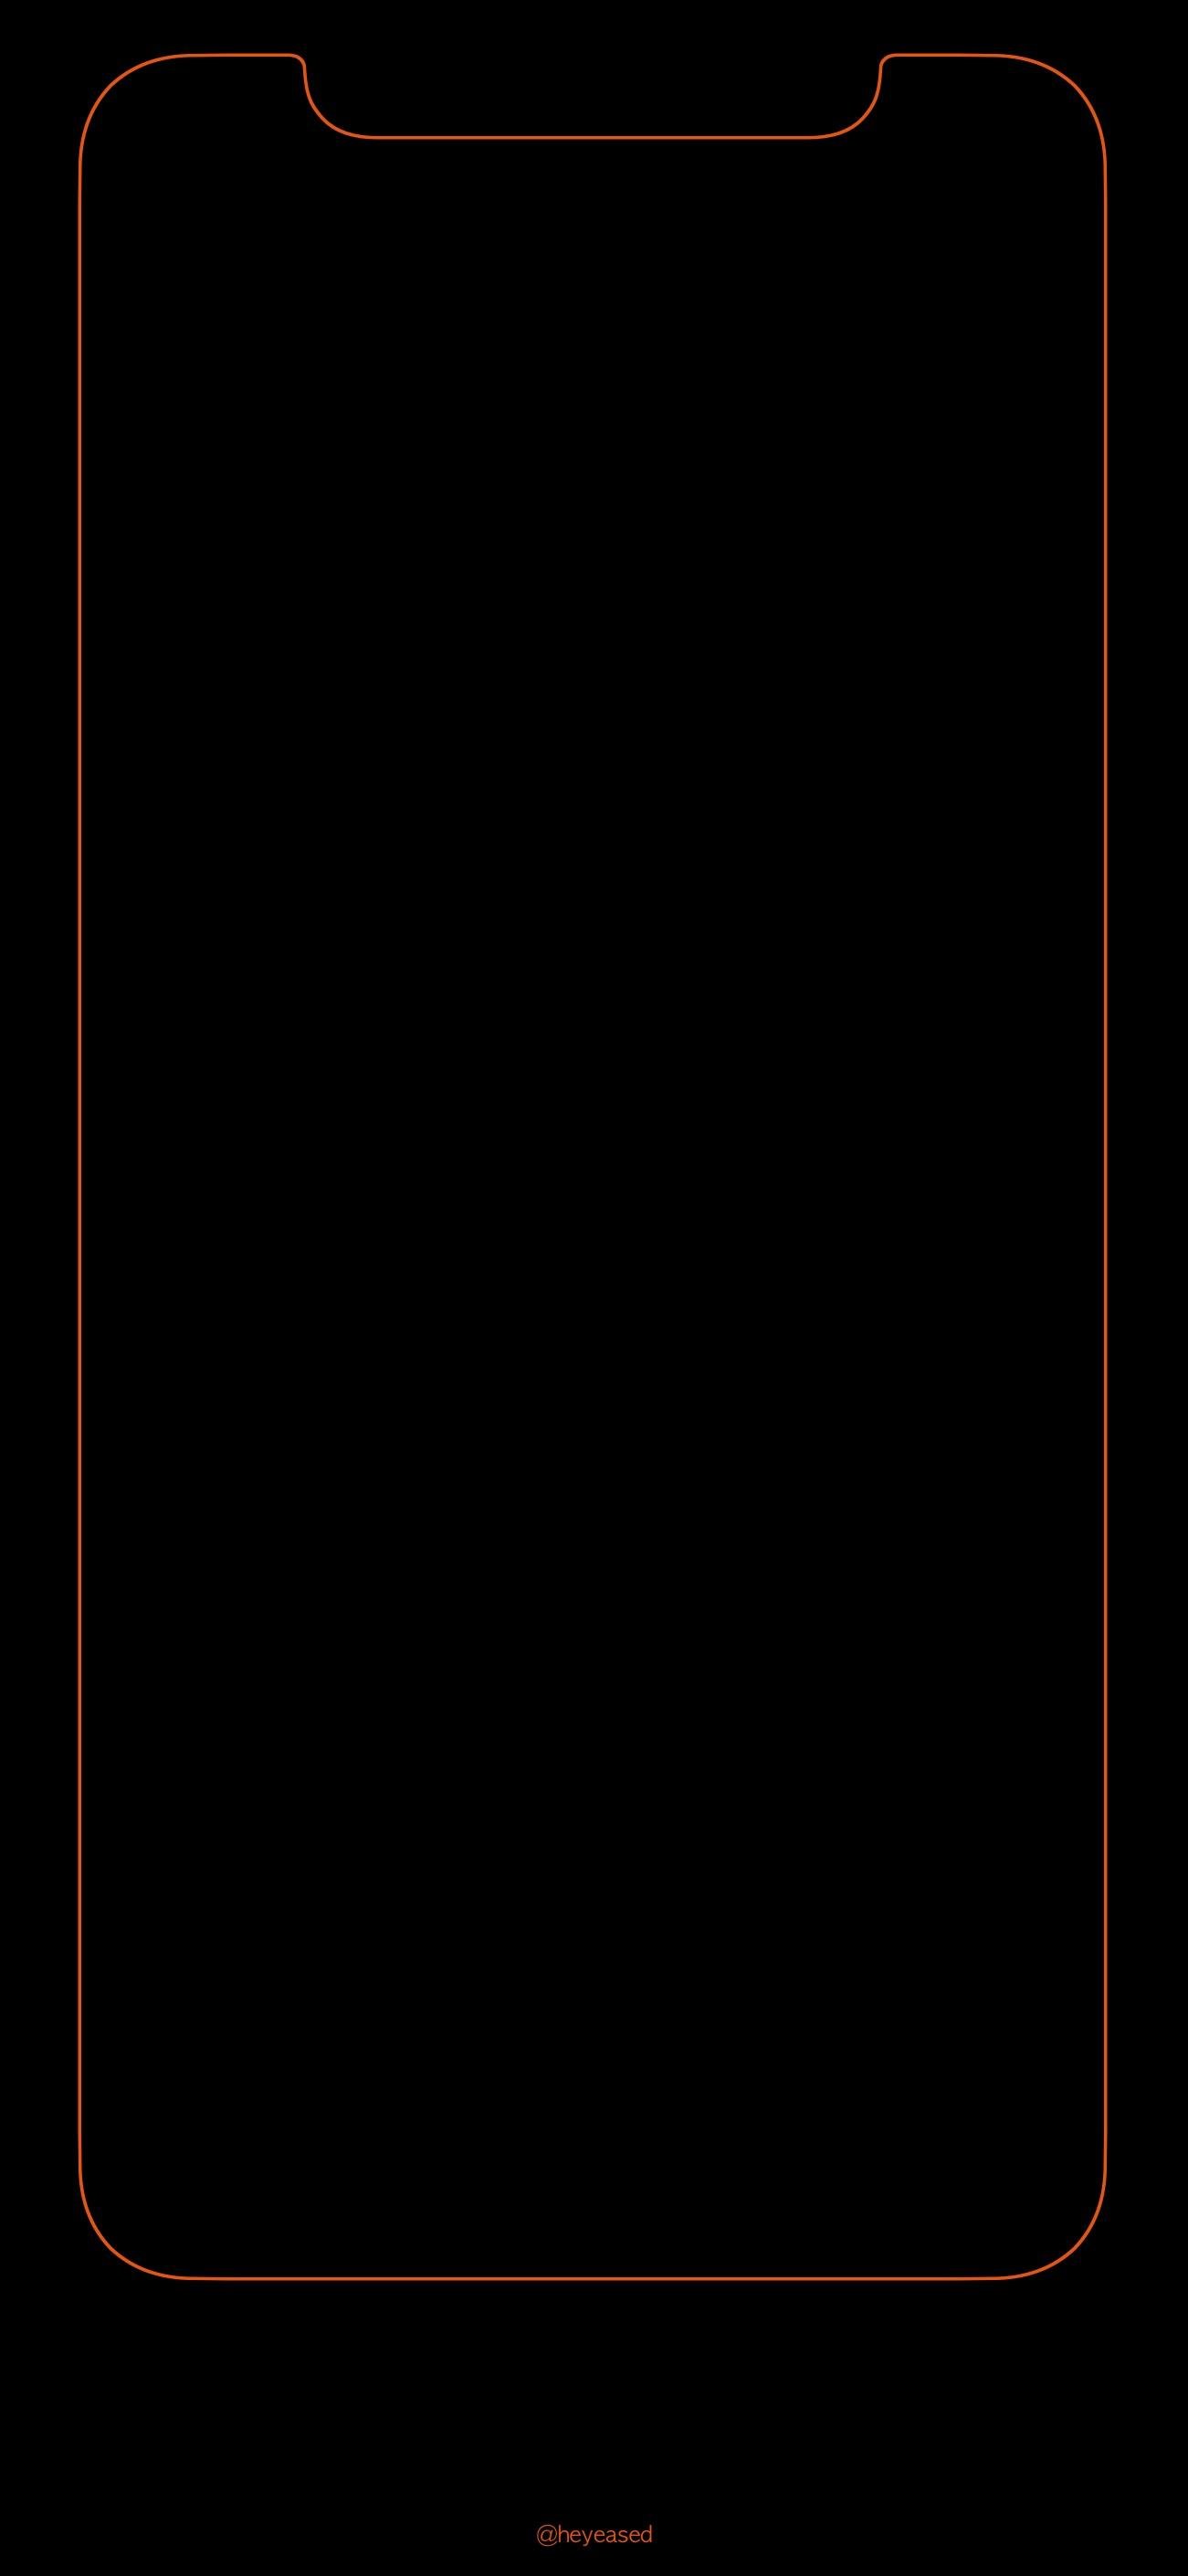 The Outline Background for the iPhone XS Max - 9GAG